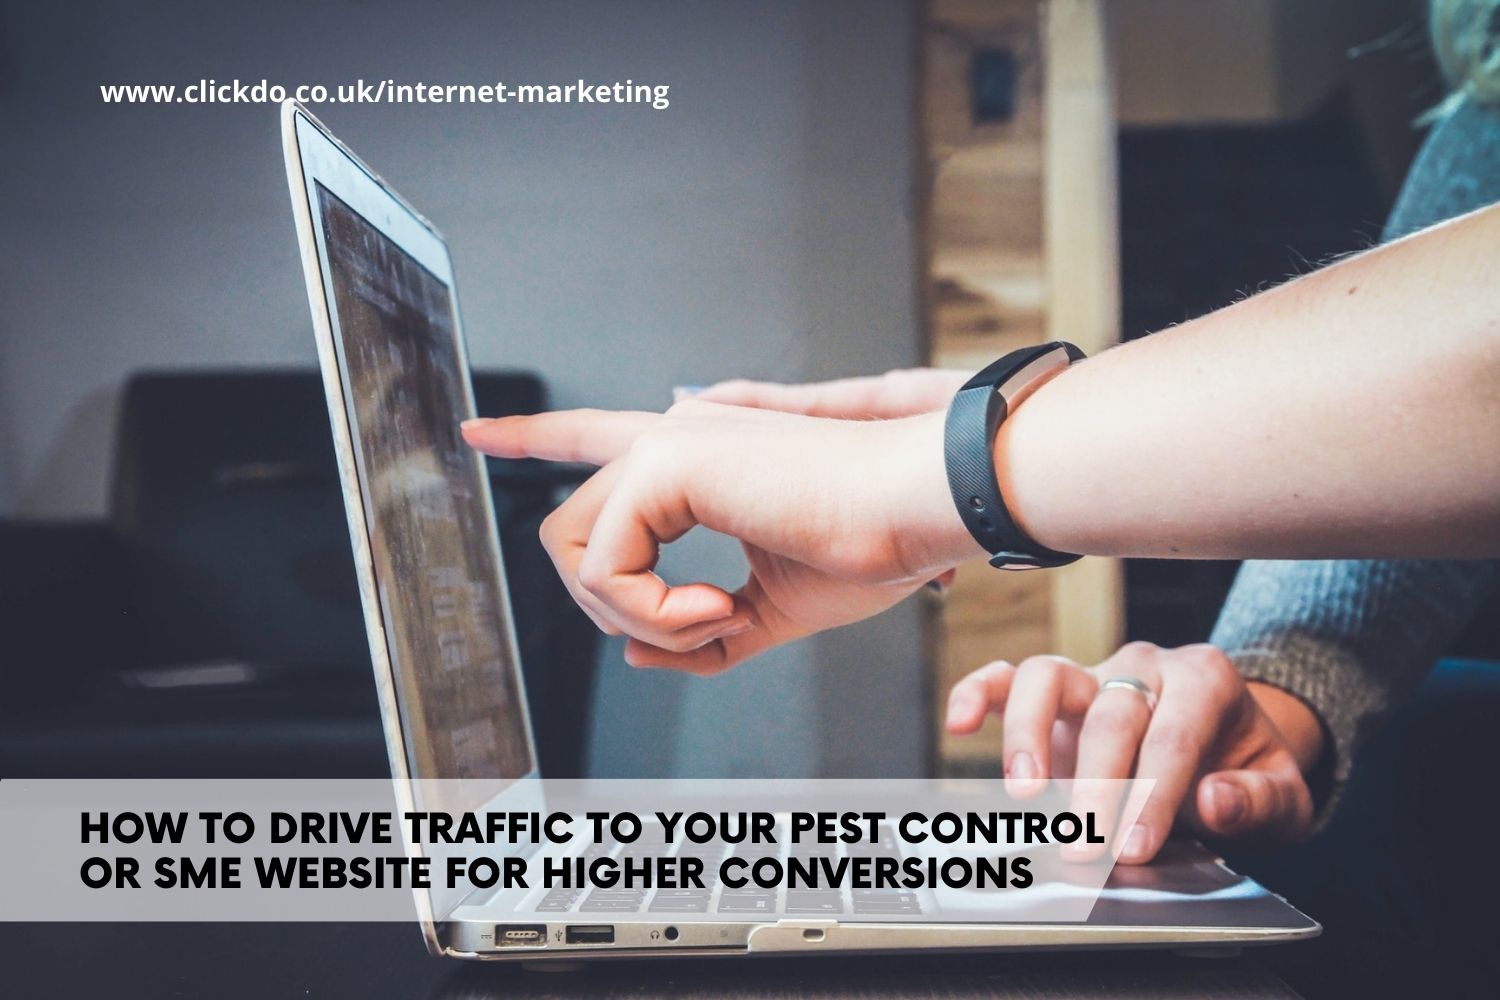 how-to-drive-traffic-to-your-pest-control-or-sme-website